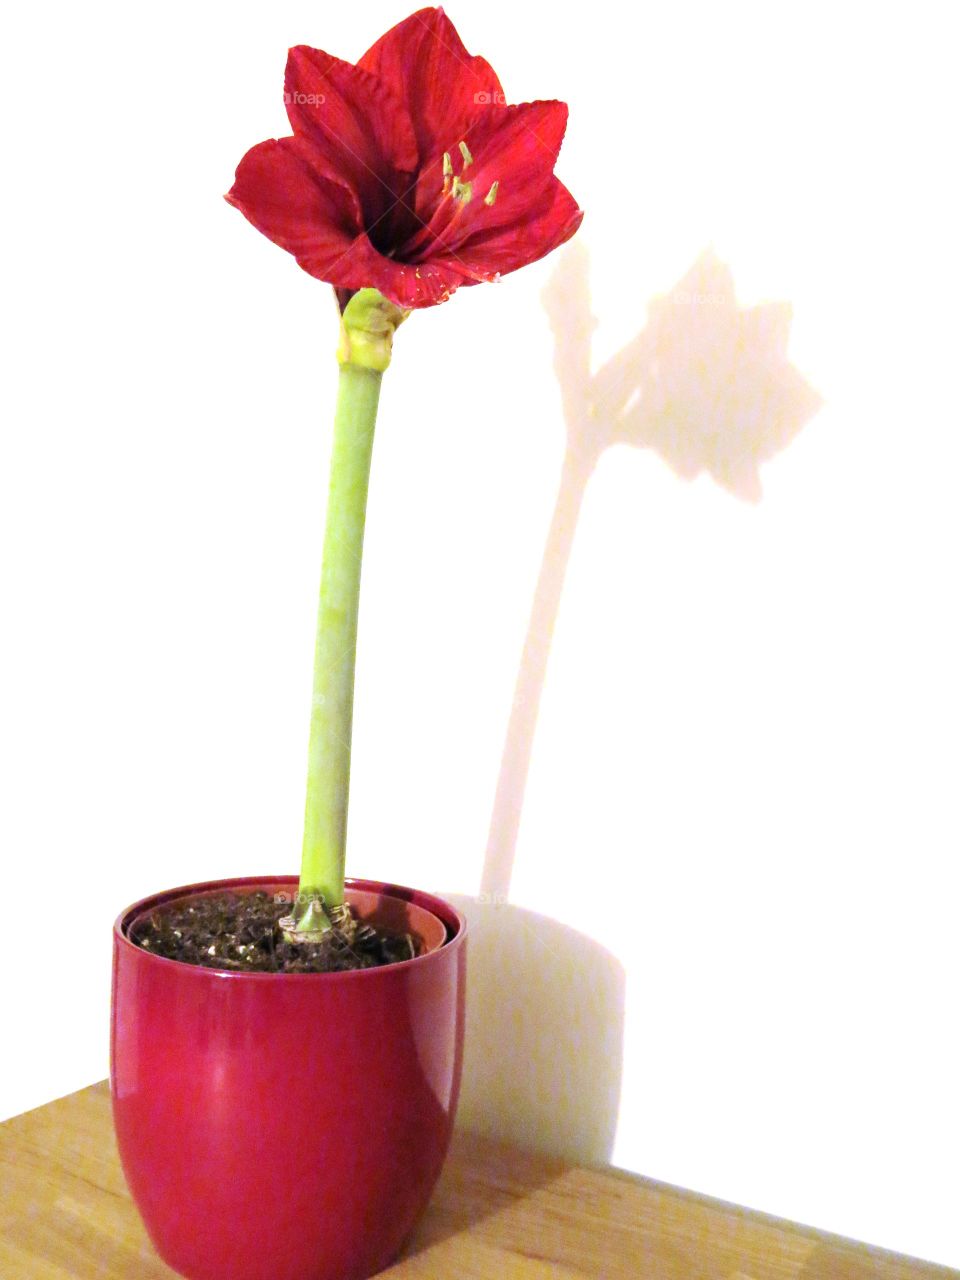 Red Lion Amaryllis . Just about to come into full bloom